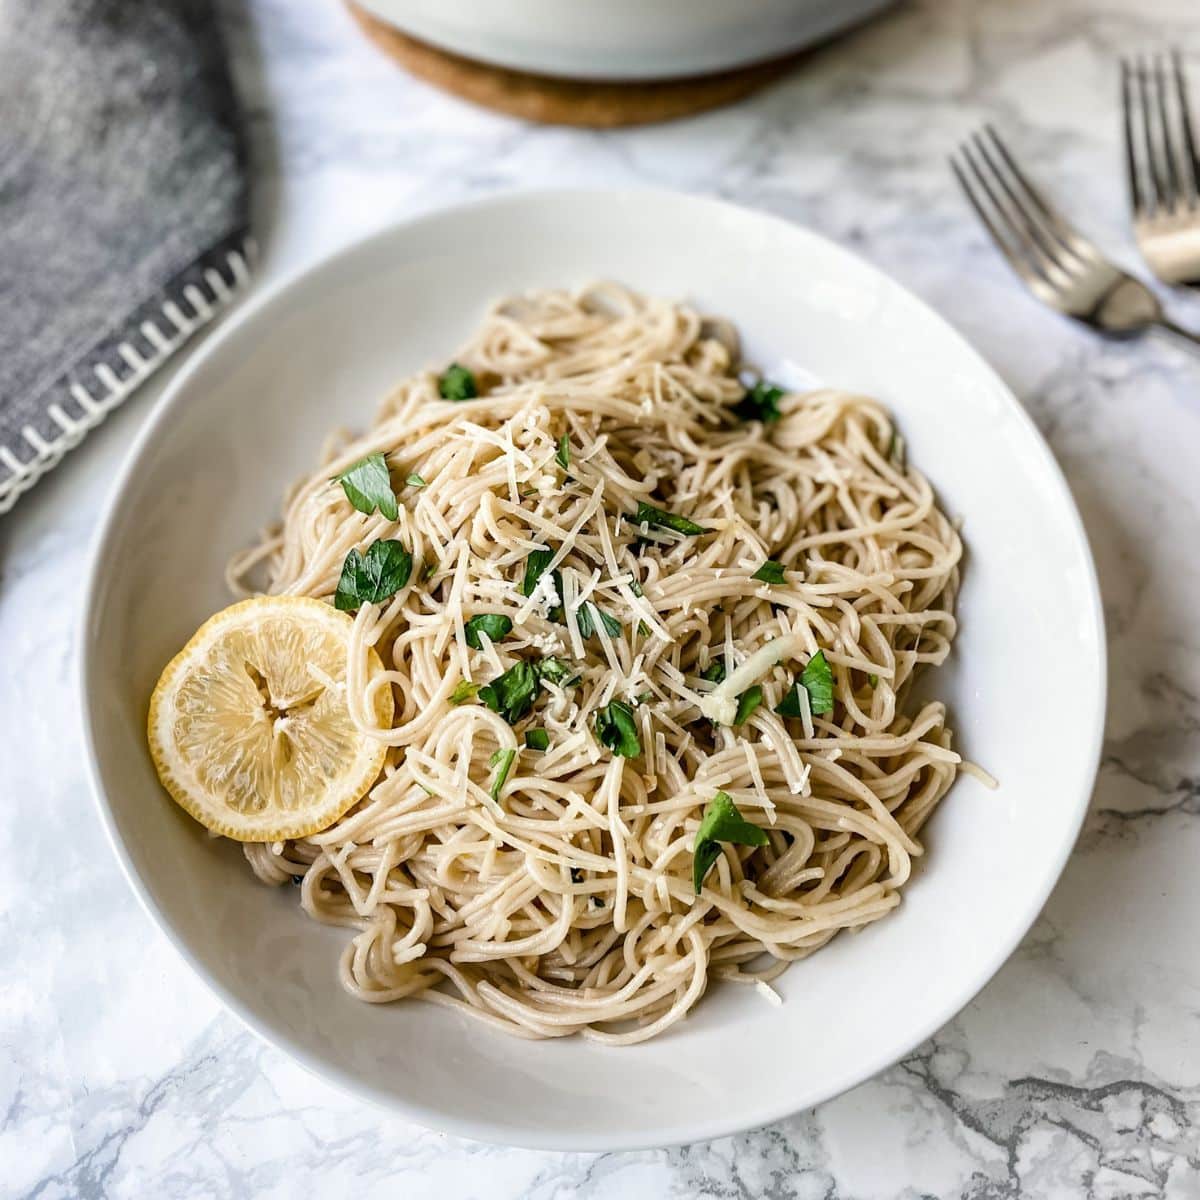 Healthy and delicious Lemon Garlic Pasta in a white bowl.